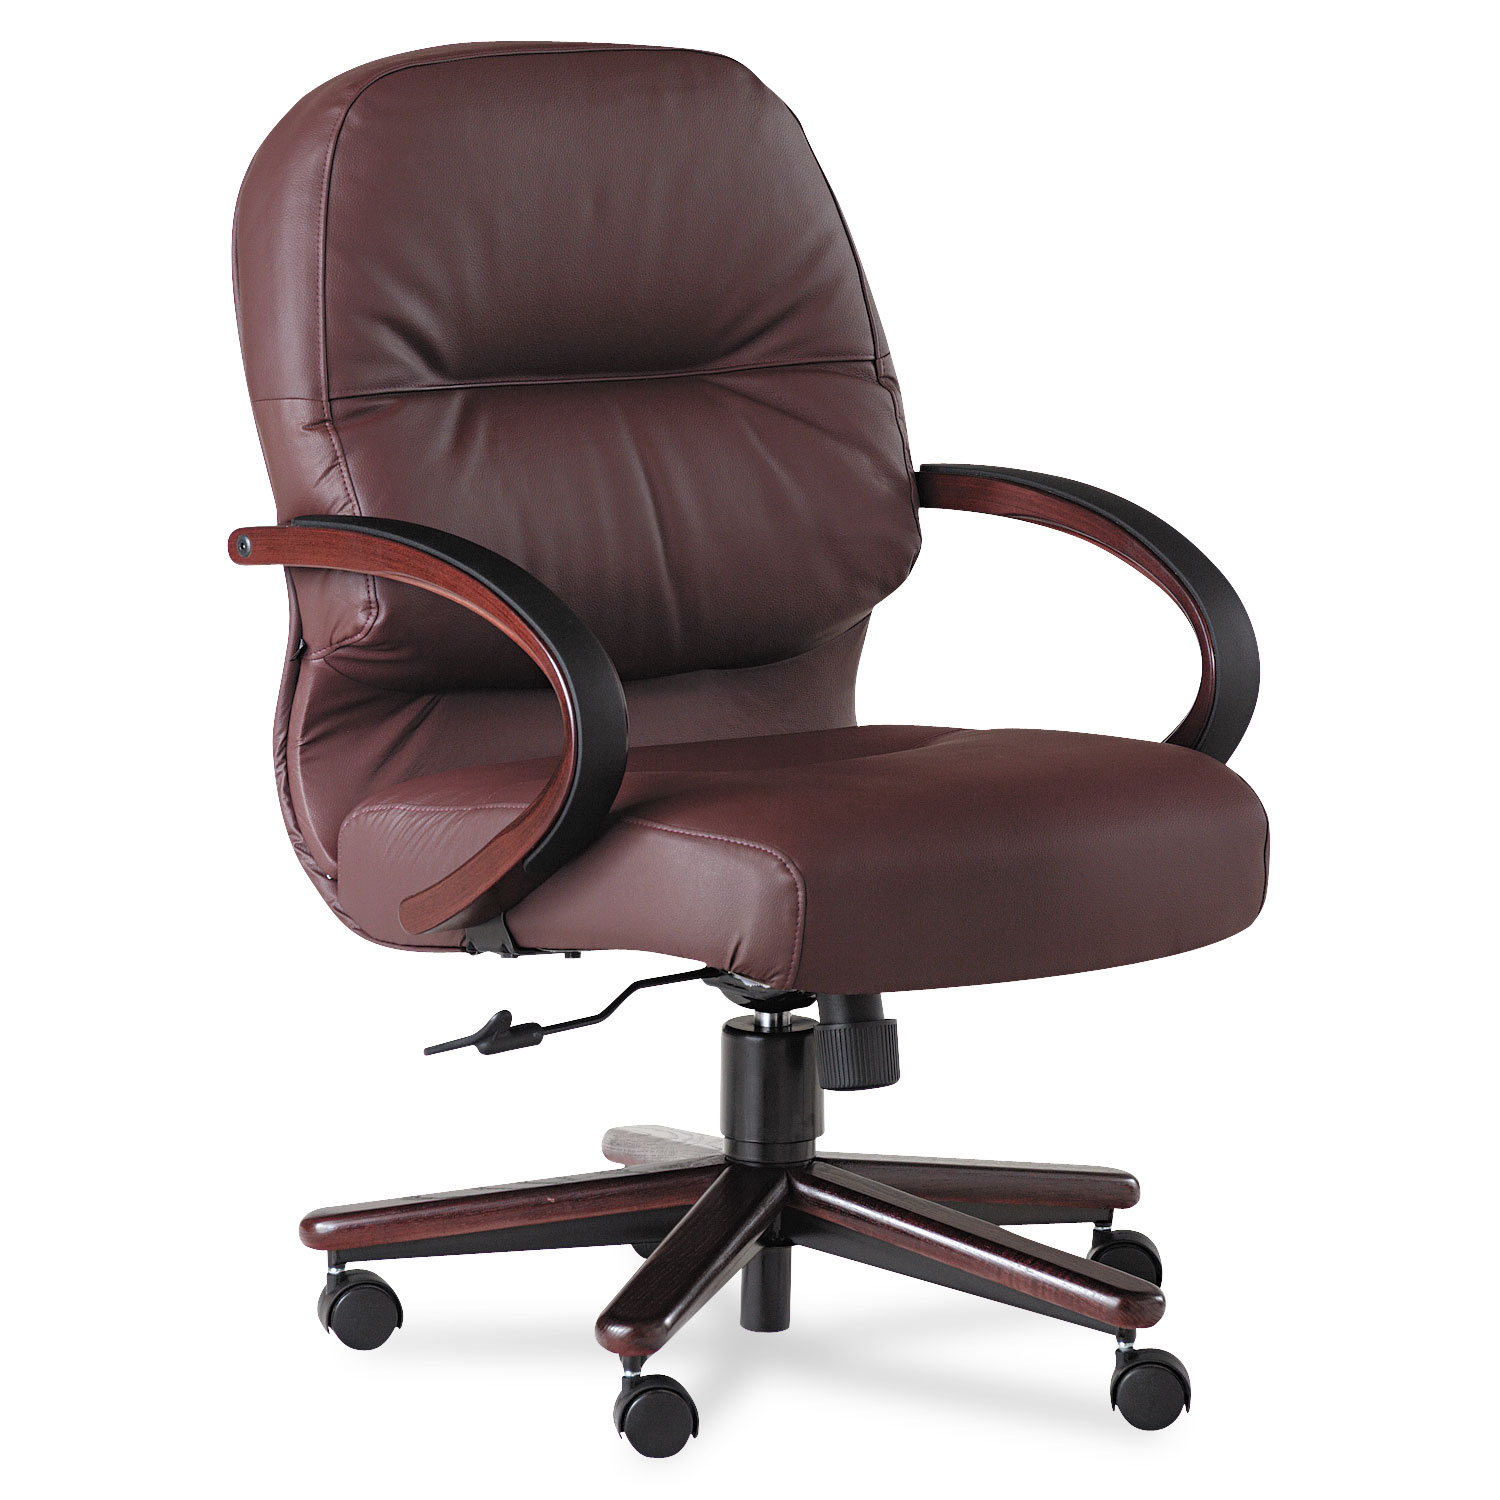  HON H2192.N.SR69 Pillow-Soft 2190 Managerial Mid-Back Chair, Supports up to 250 lbs., Burgundy Seat/Burgundy Back, Mahogany Base (HON2192NSR69) 